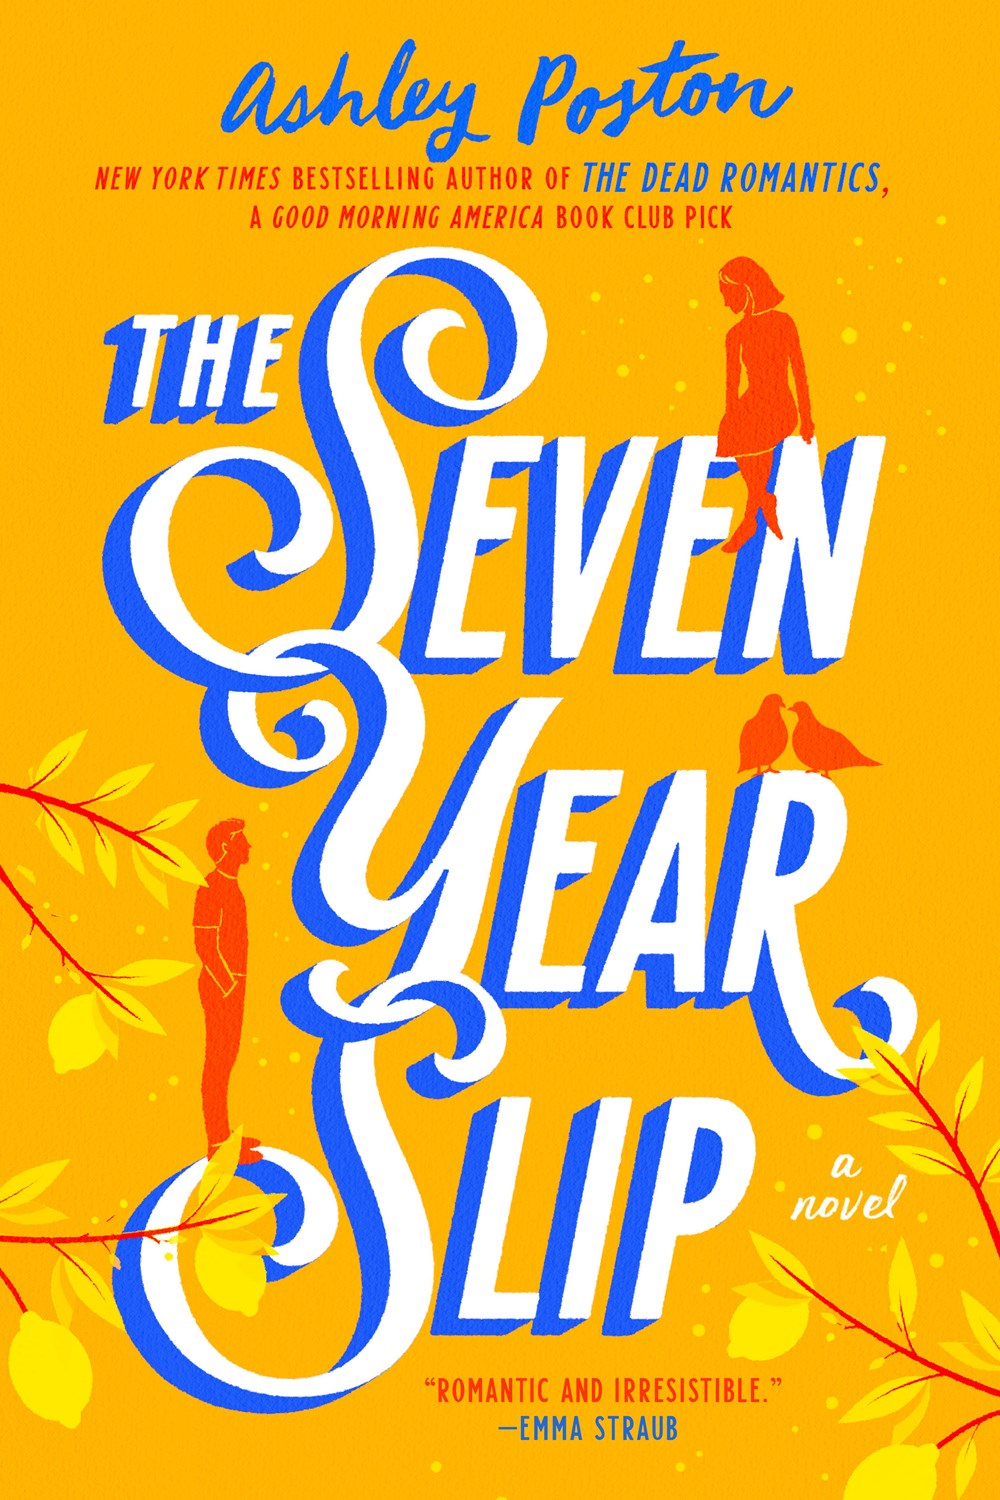 The Seven Year Slip cover image